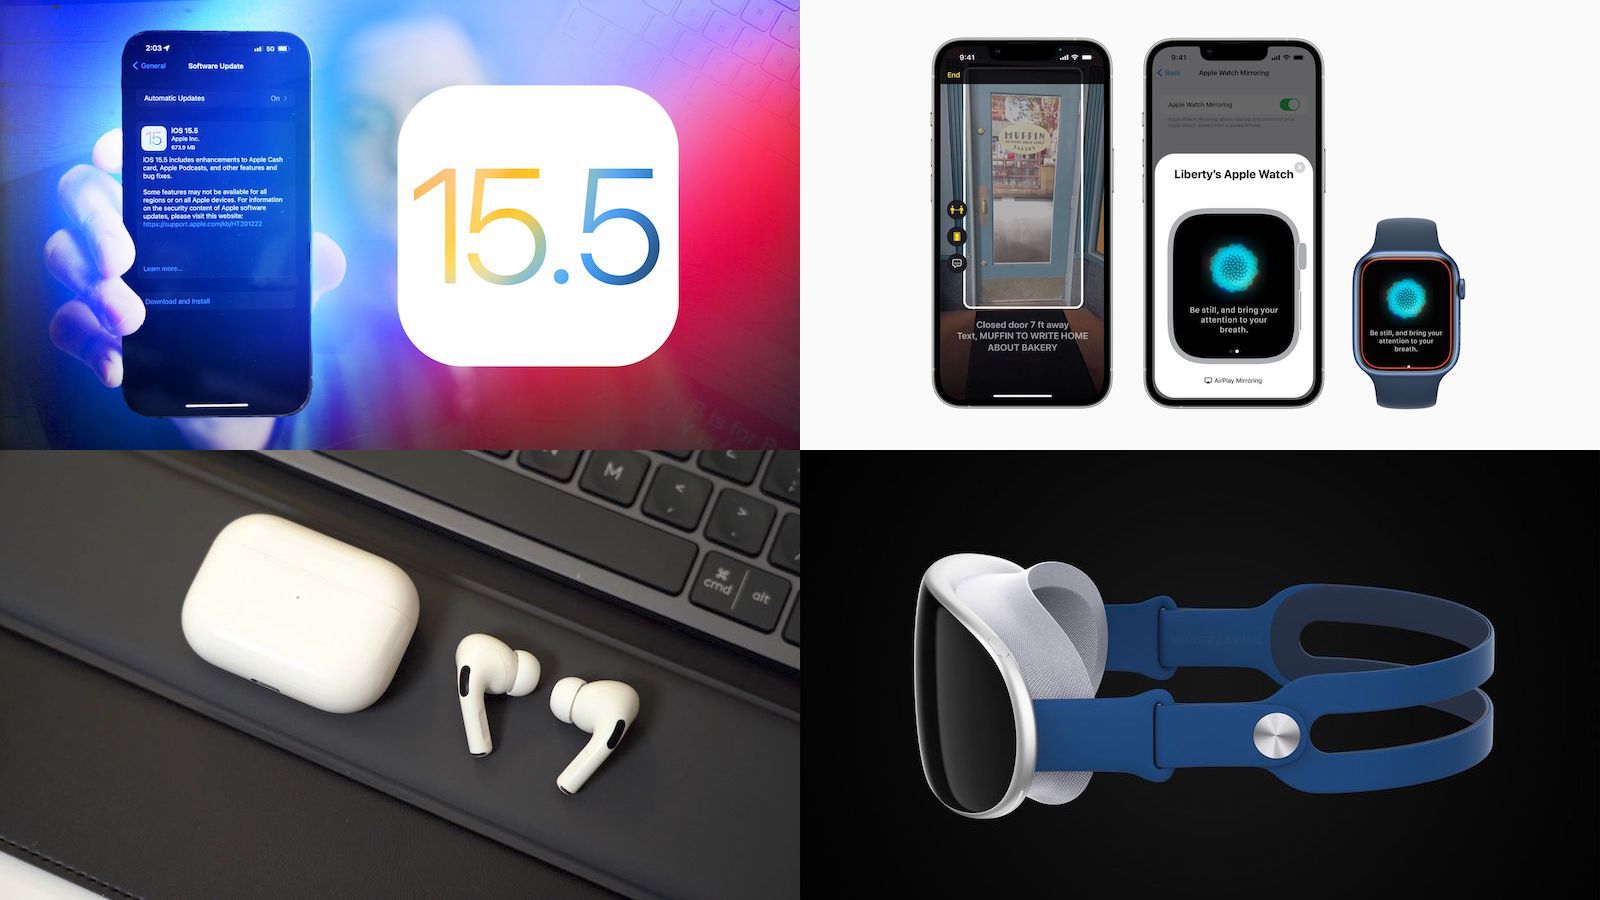 Top Stories: iOS 15.5 Released, Apple's AR/VR Headset Progress, USB-C AirPods?